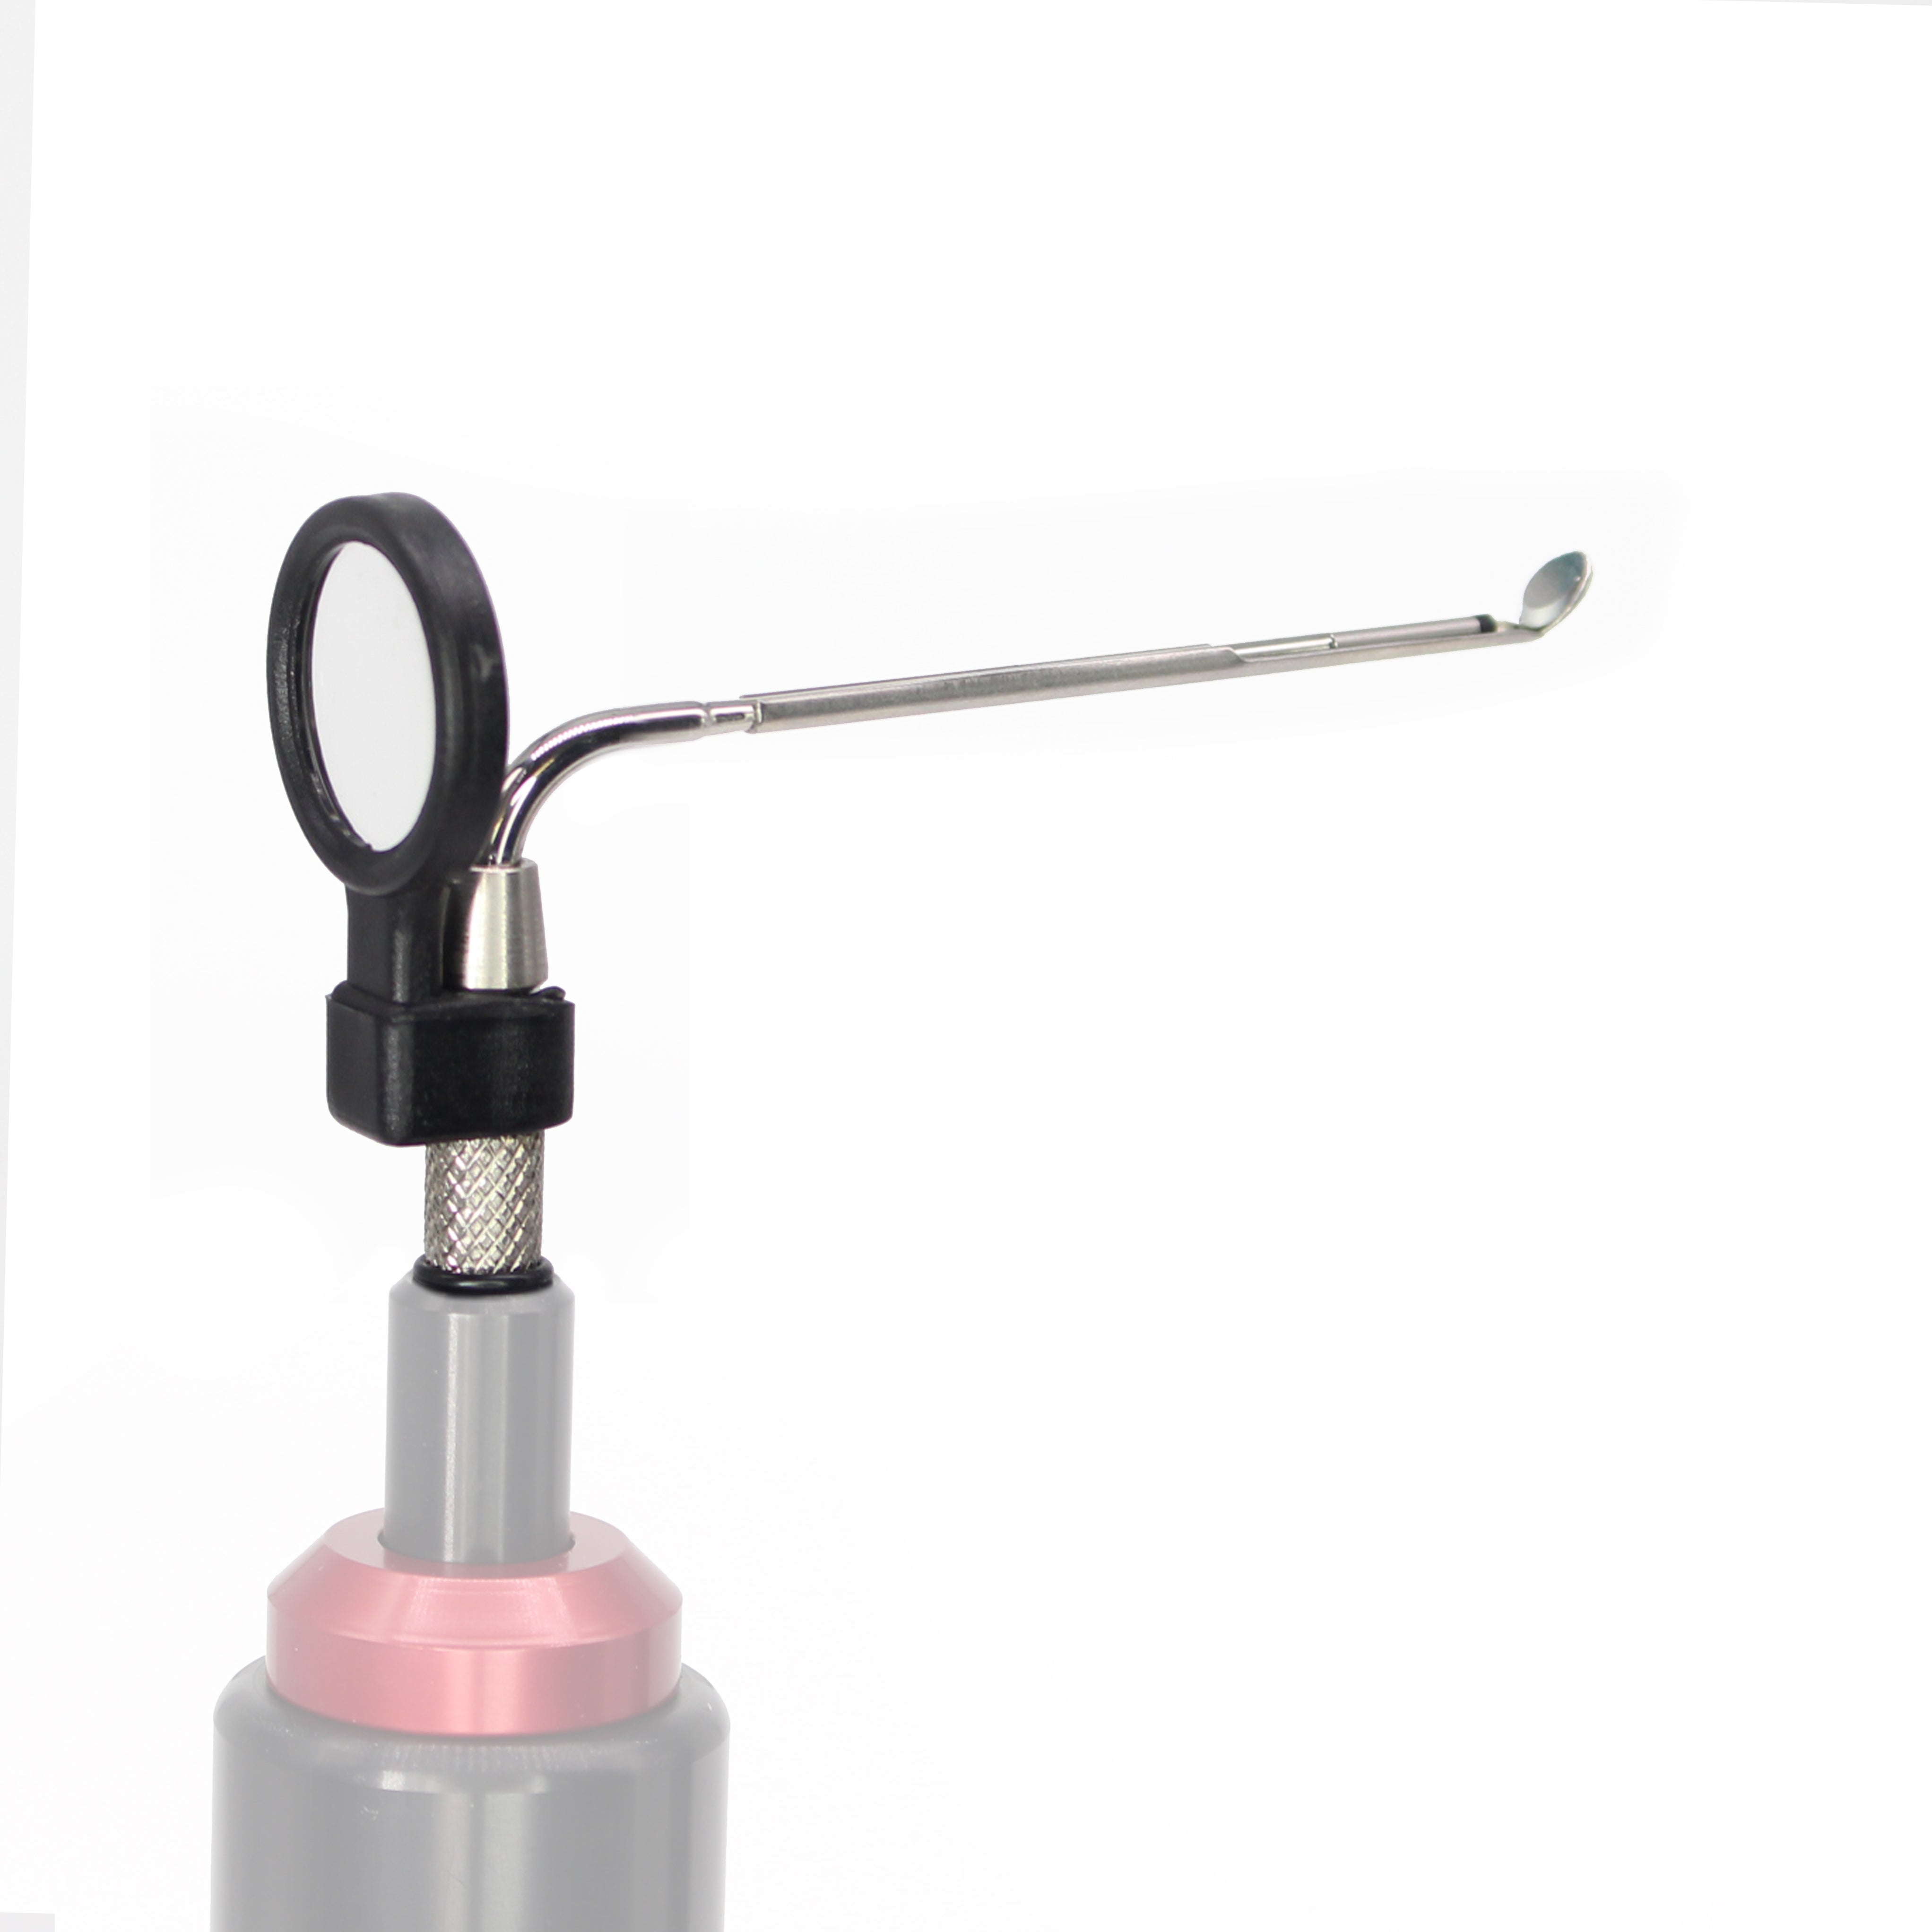 Bore Viewer 'Side Viewing' Probe 3mm to 12.5mm